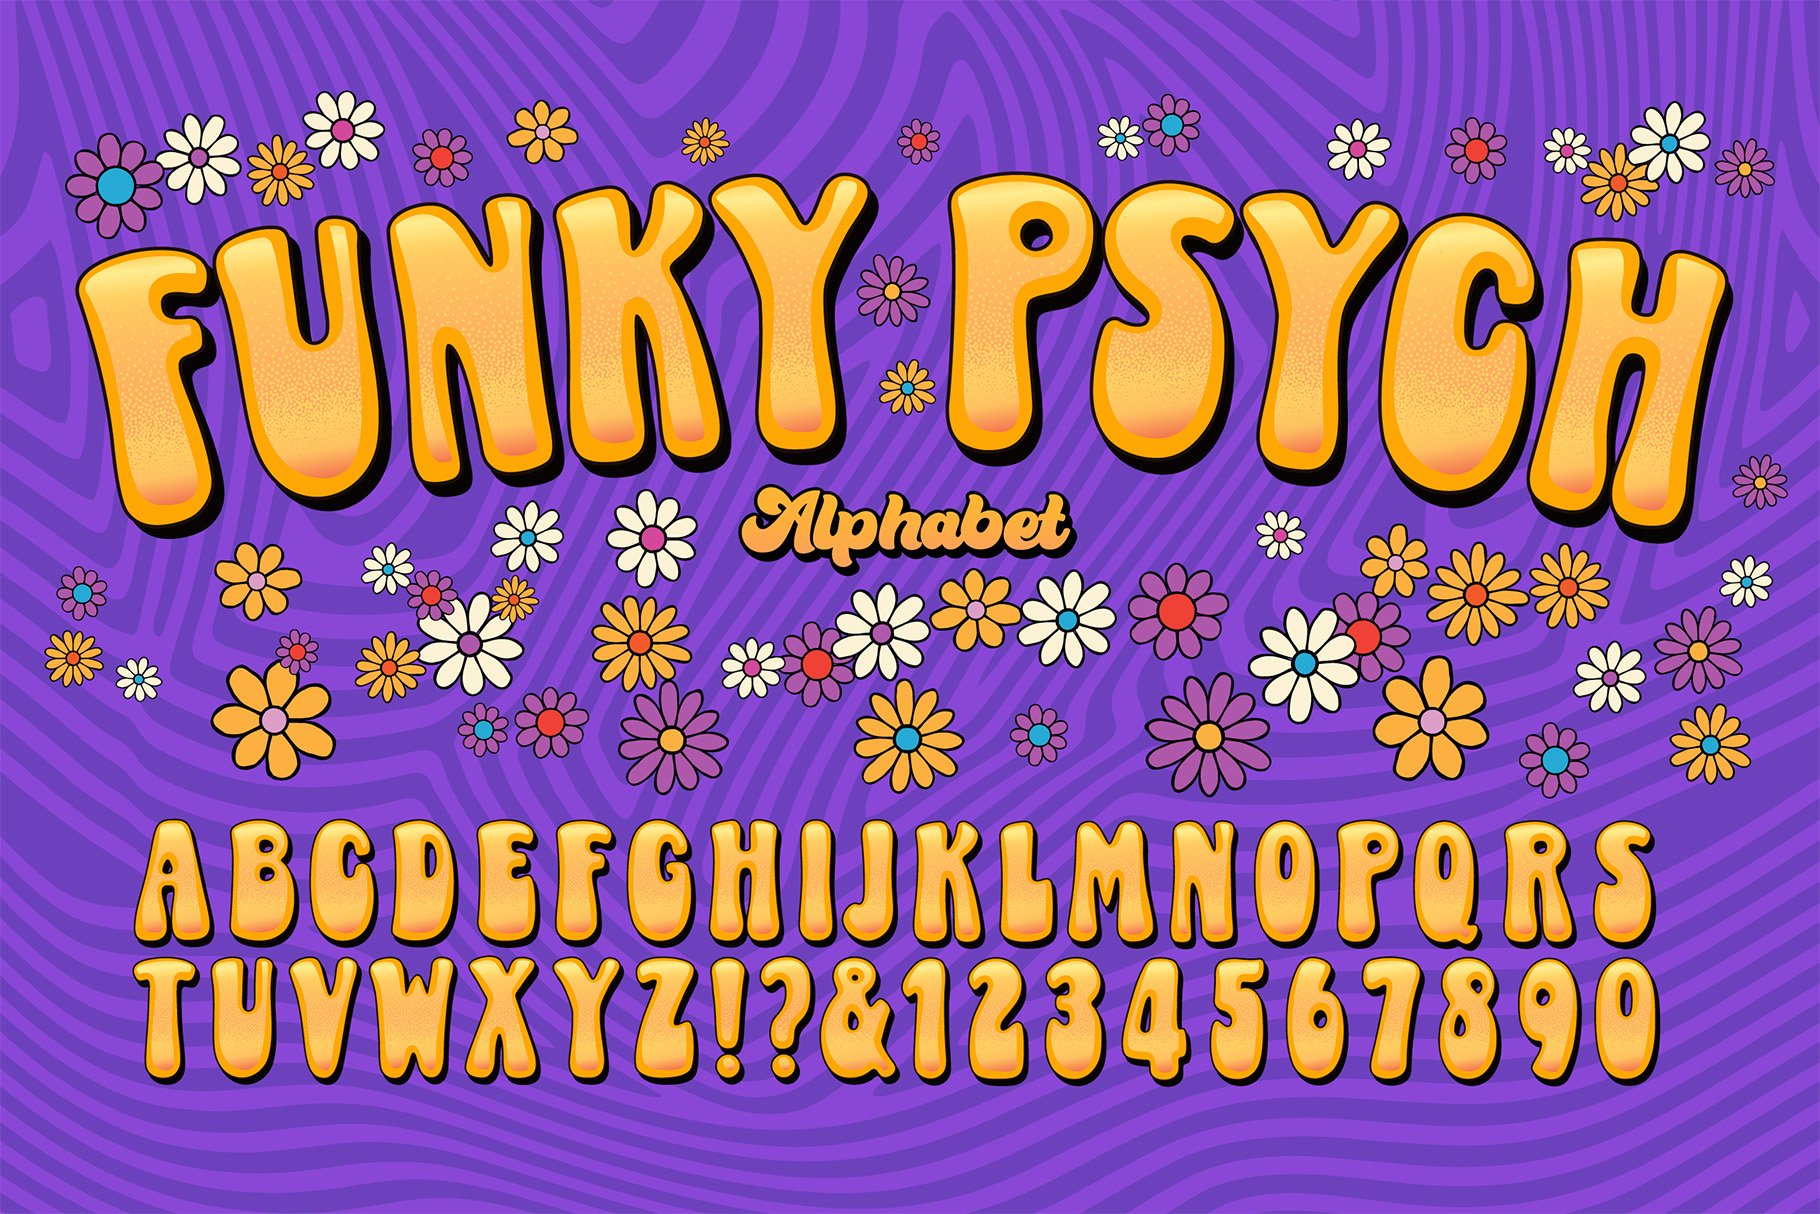 Funky Psych Vector Alphabet cover image.